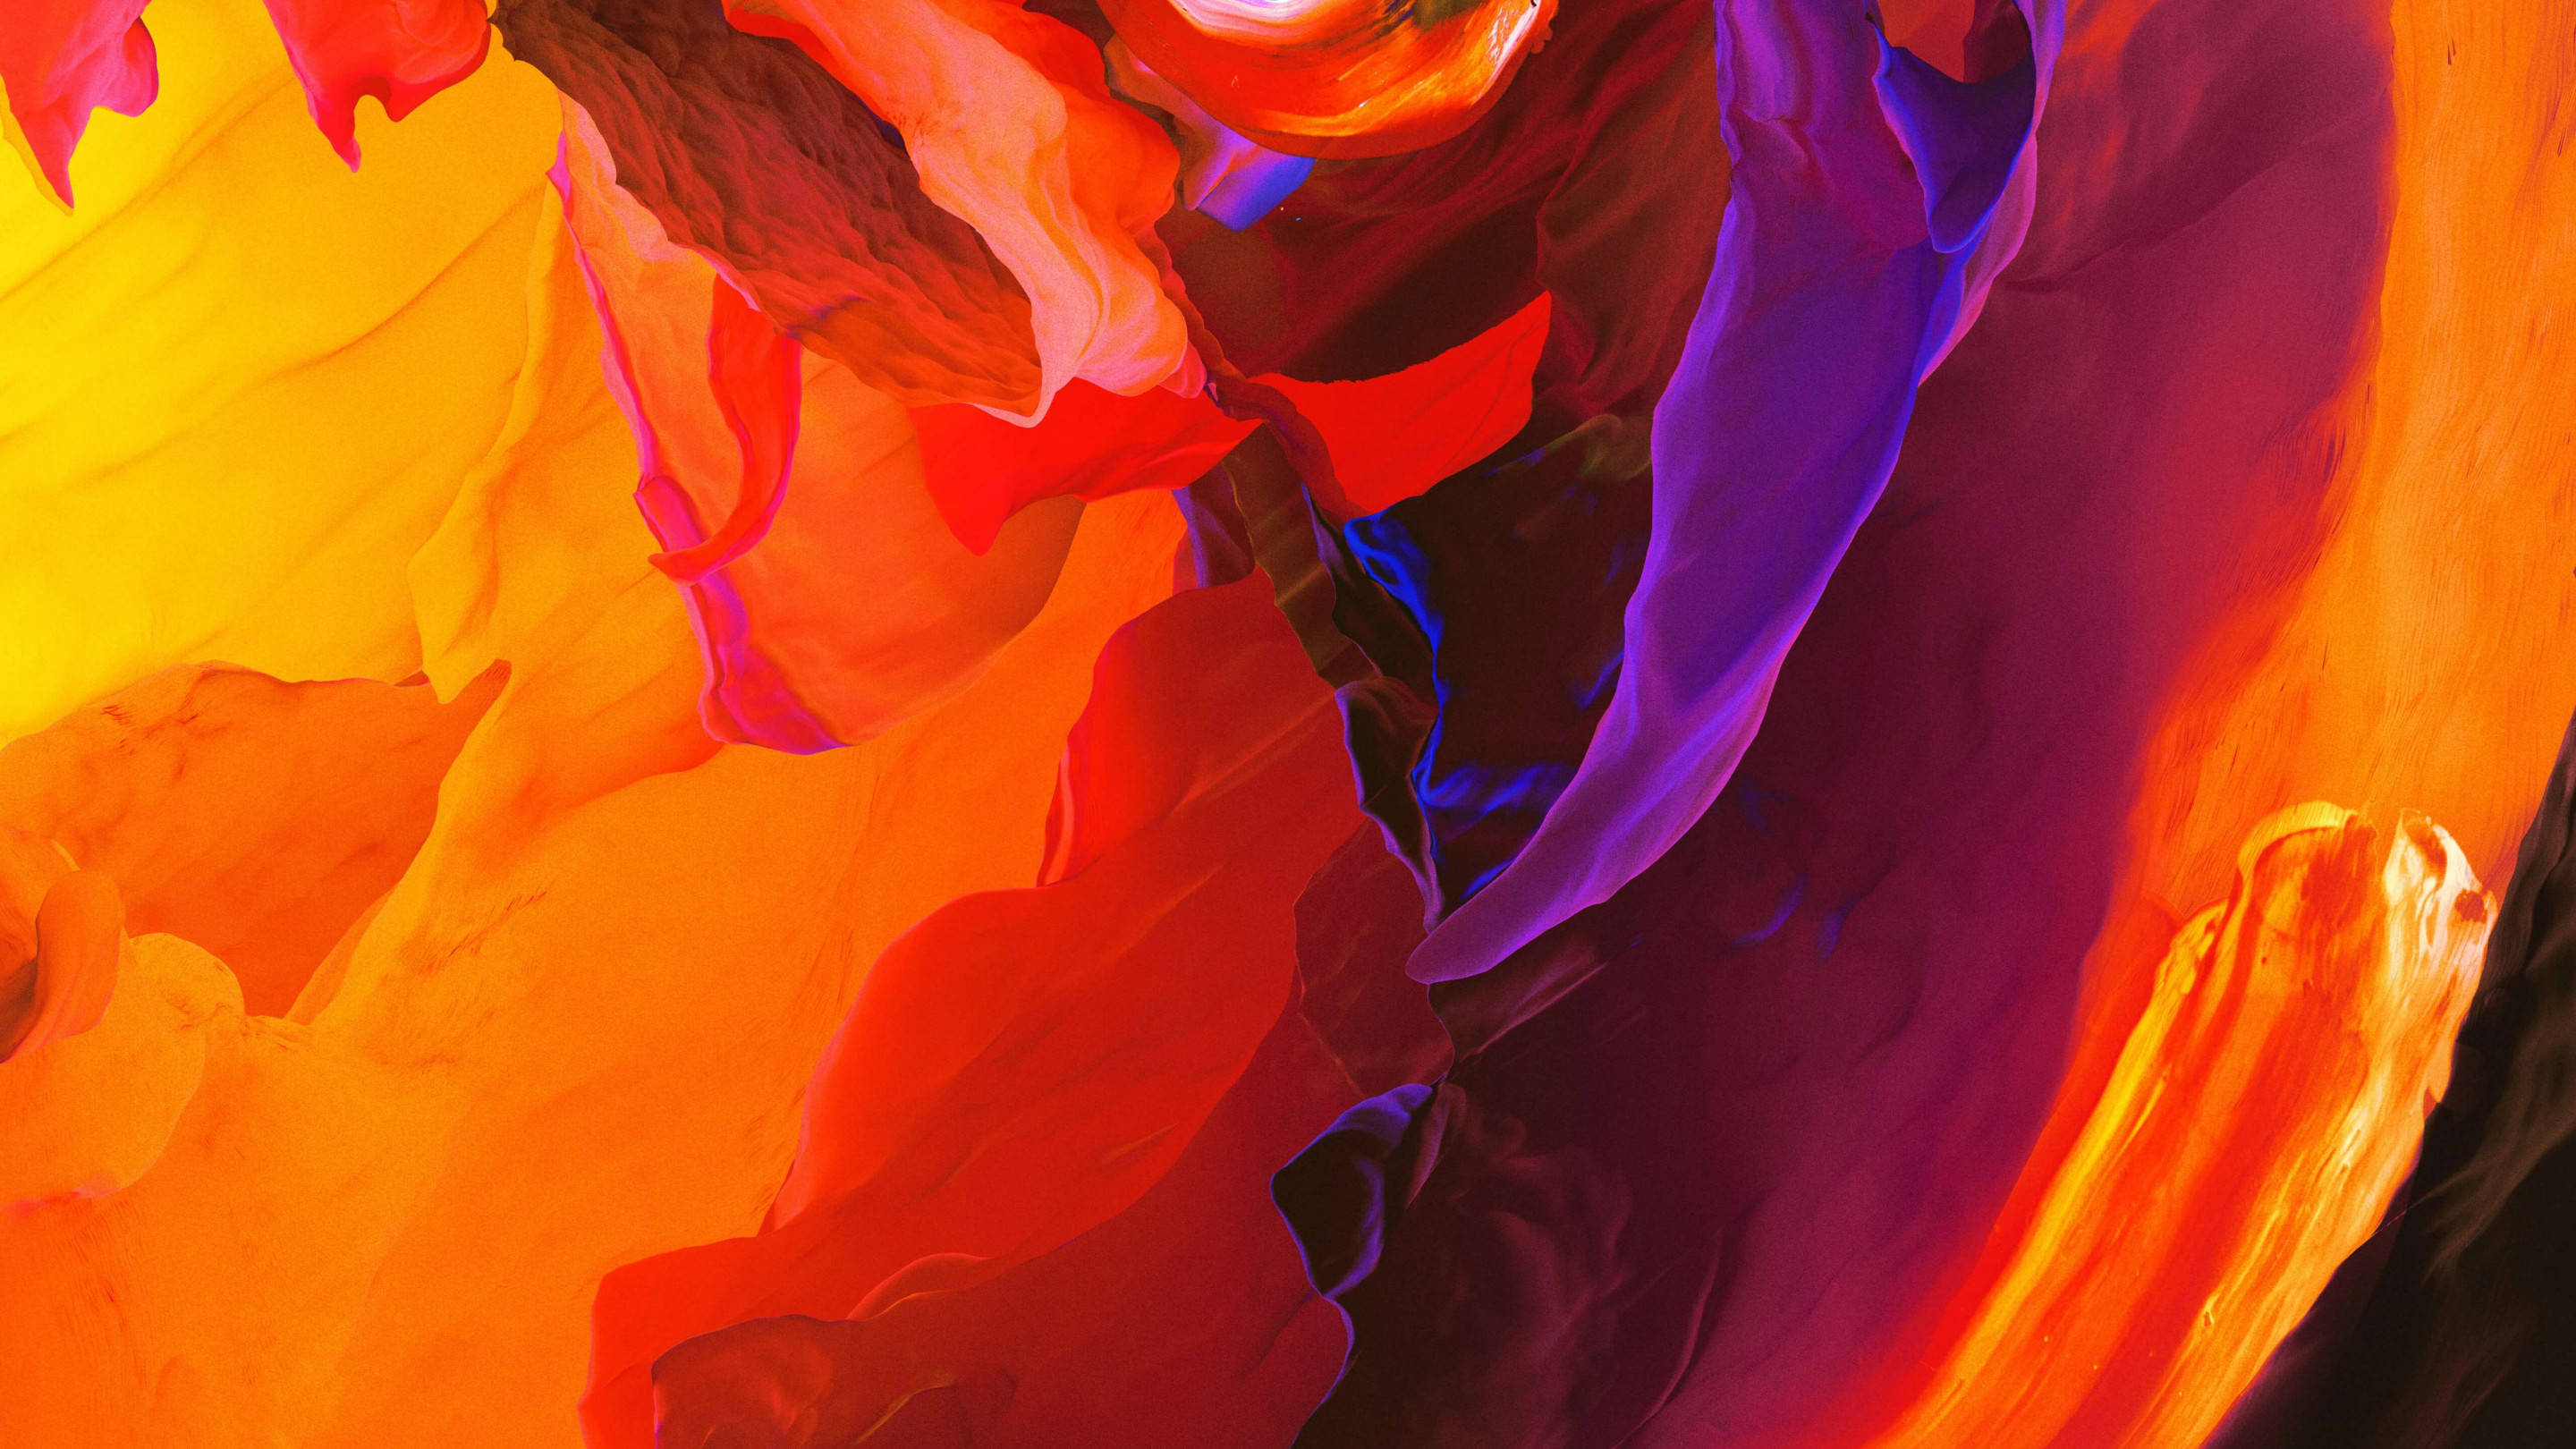 Red Orange Colorful Abstract wallpaper 2880x1620